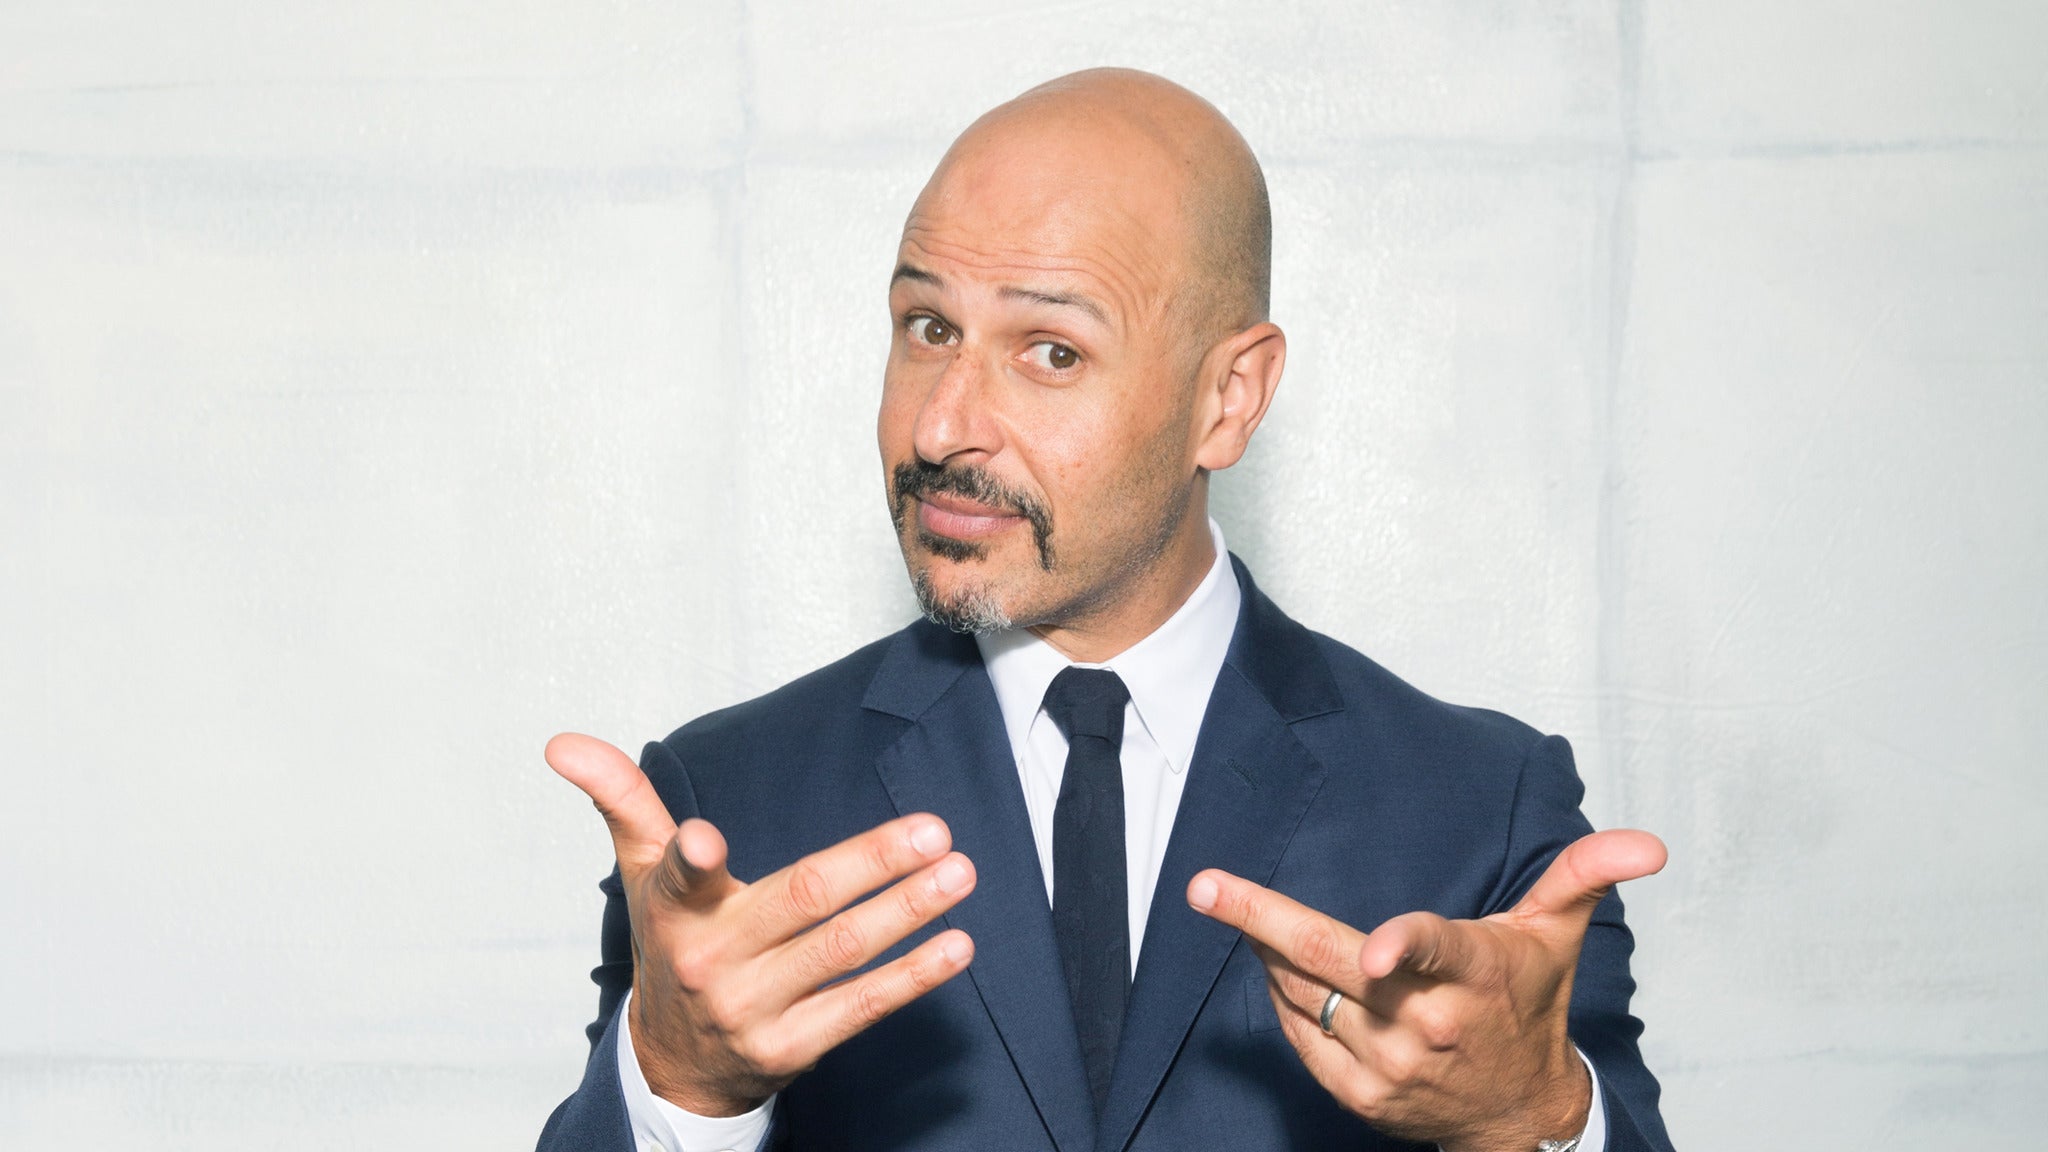 Maz Jobrani: Things are Looking Bright Tour